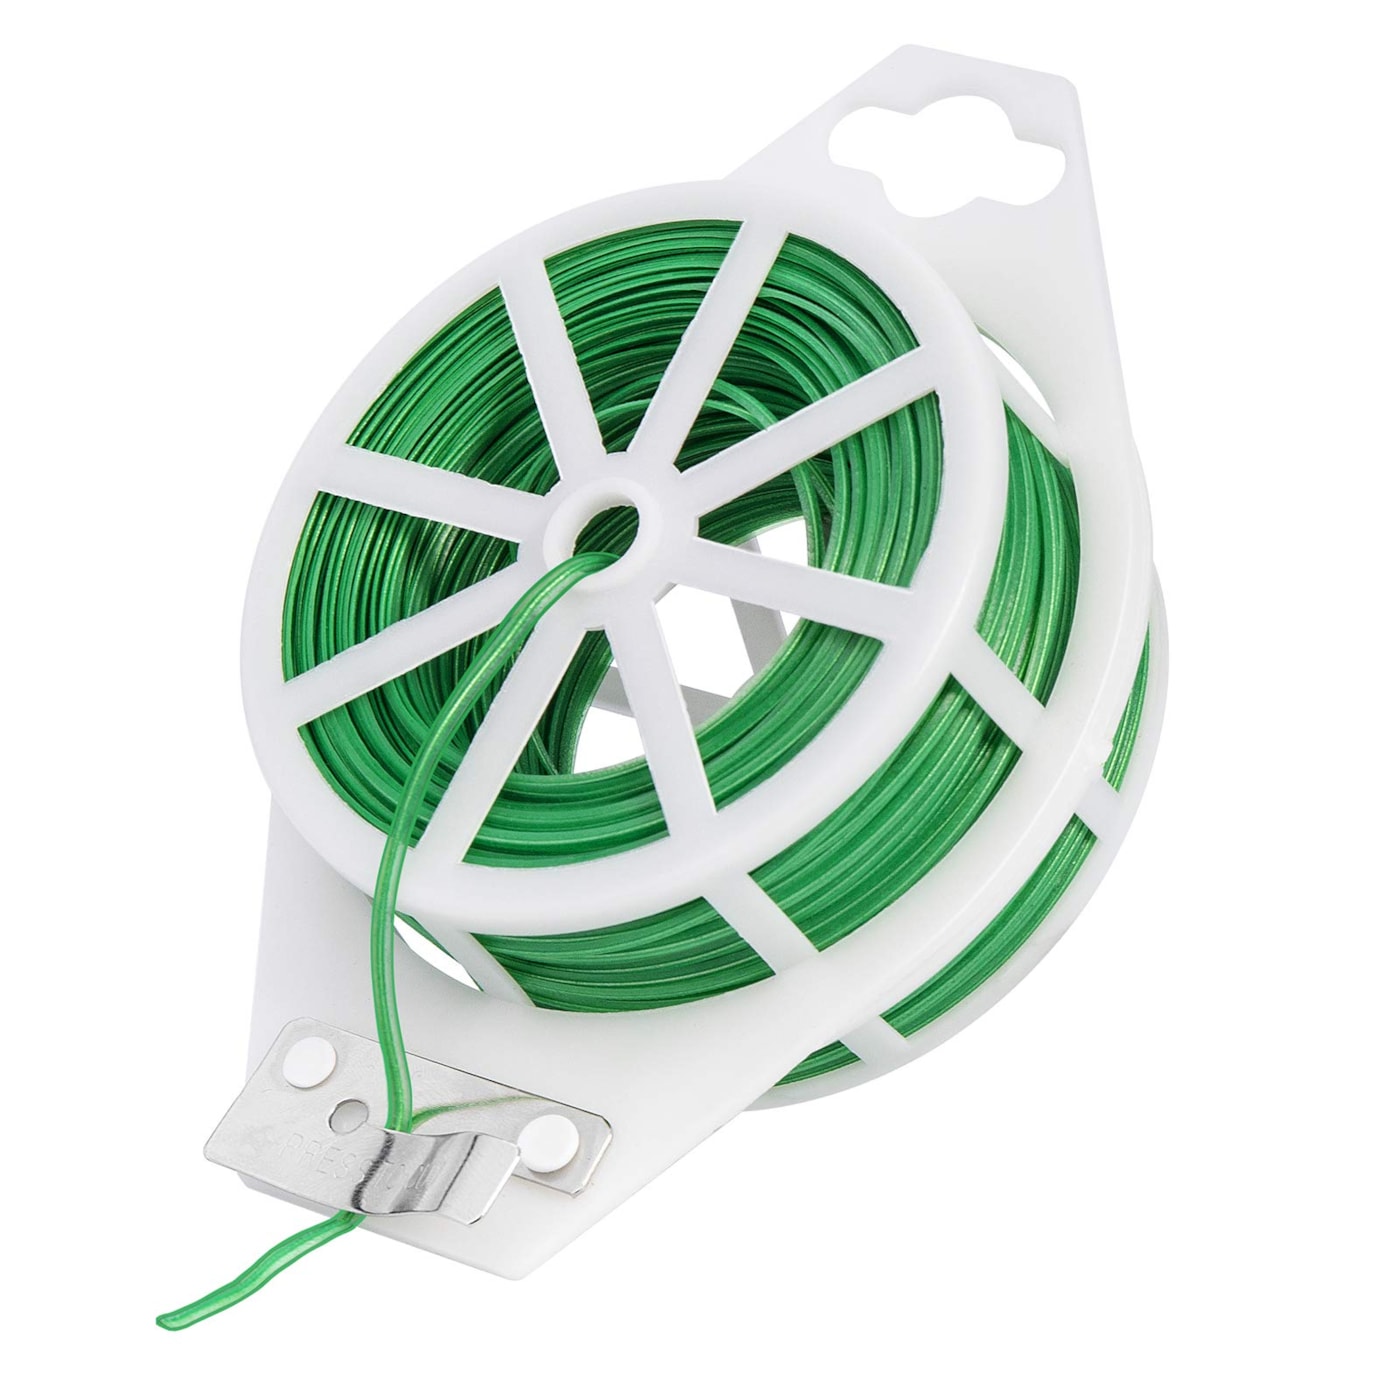 VIVOSUN 328 Feet PE-Coated Twist Tie, Roll Spool Dispenser with Cutter Secure Garden Plant Multi-Function Cable Snack Tie, Green